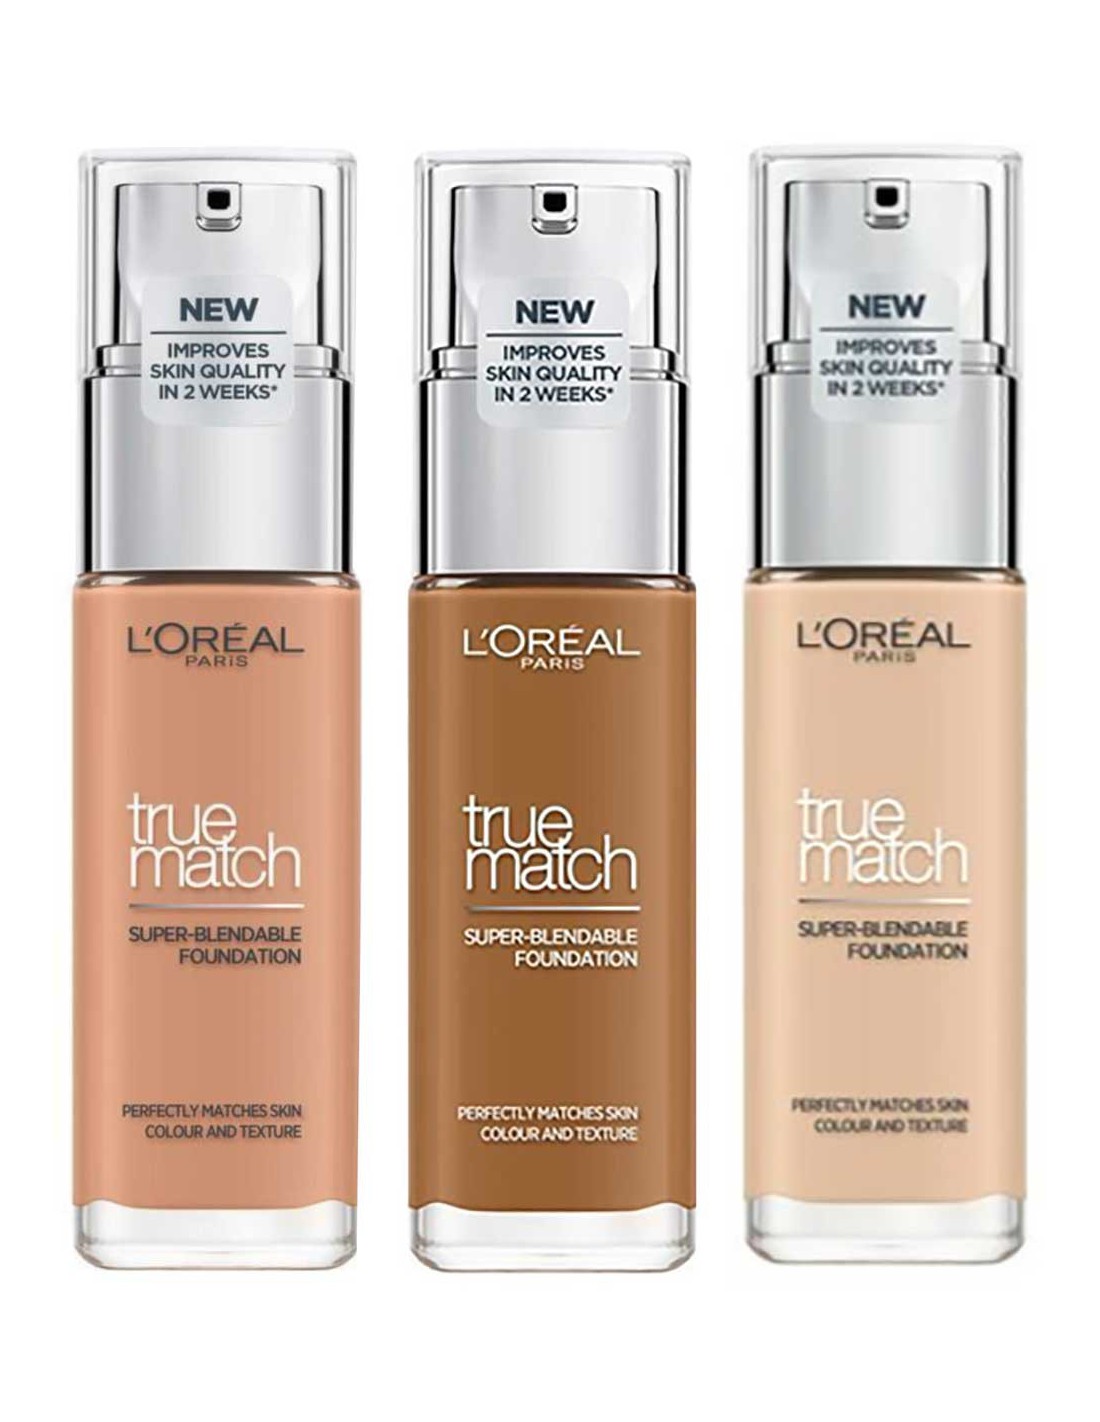 L'Oreal True match foundations in all colours